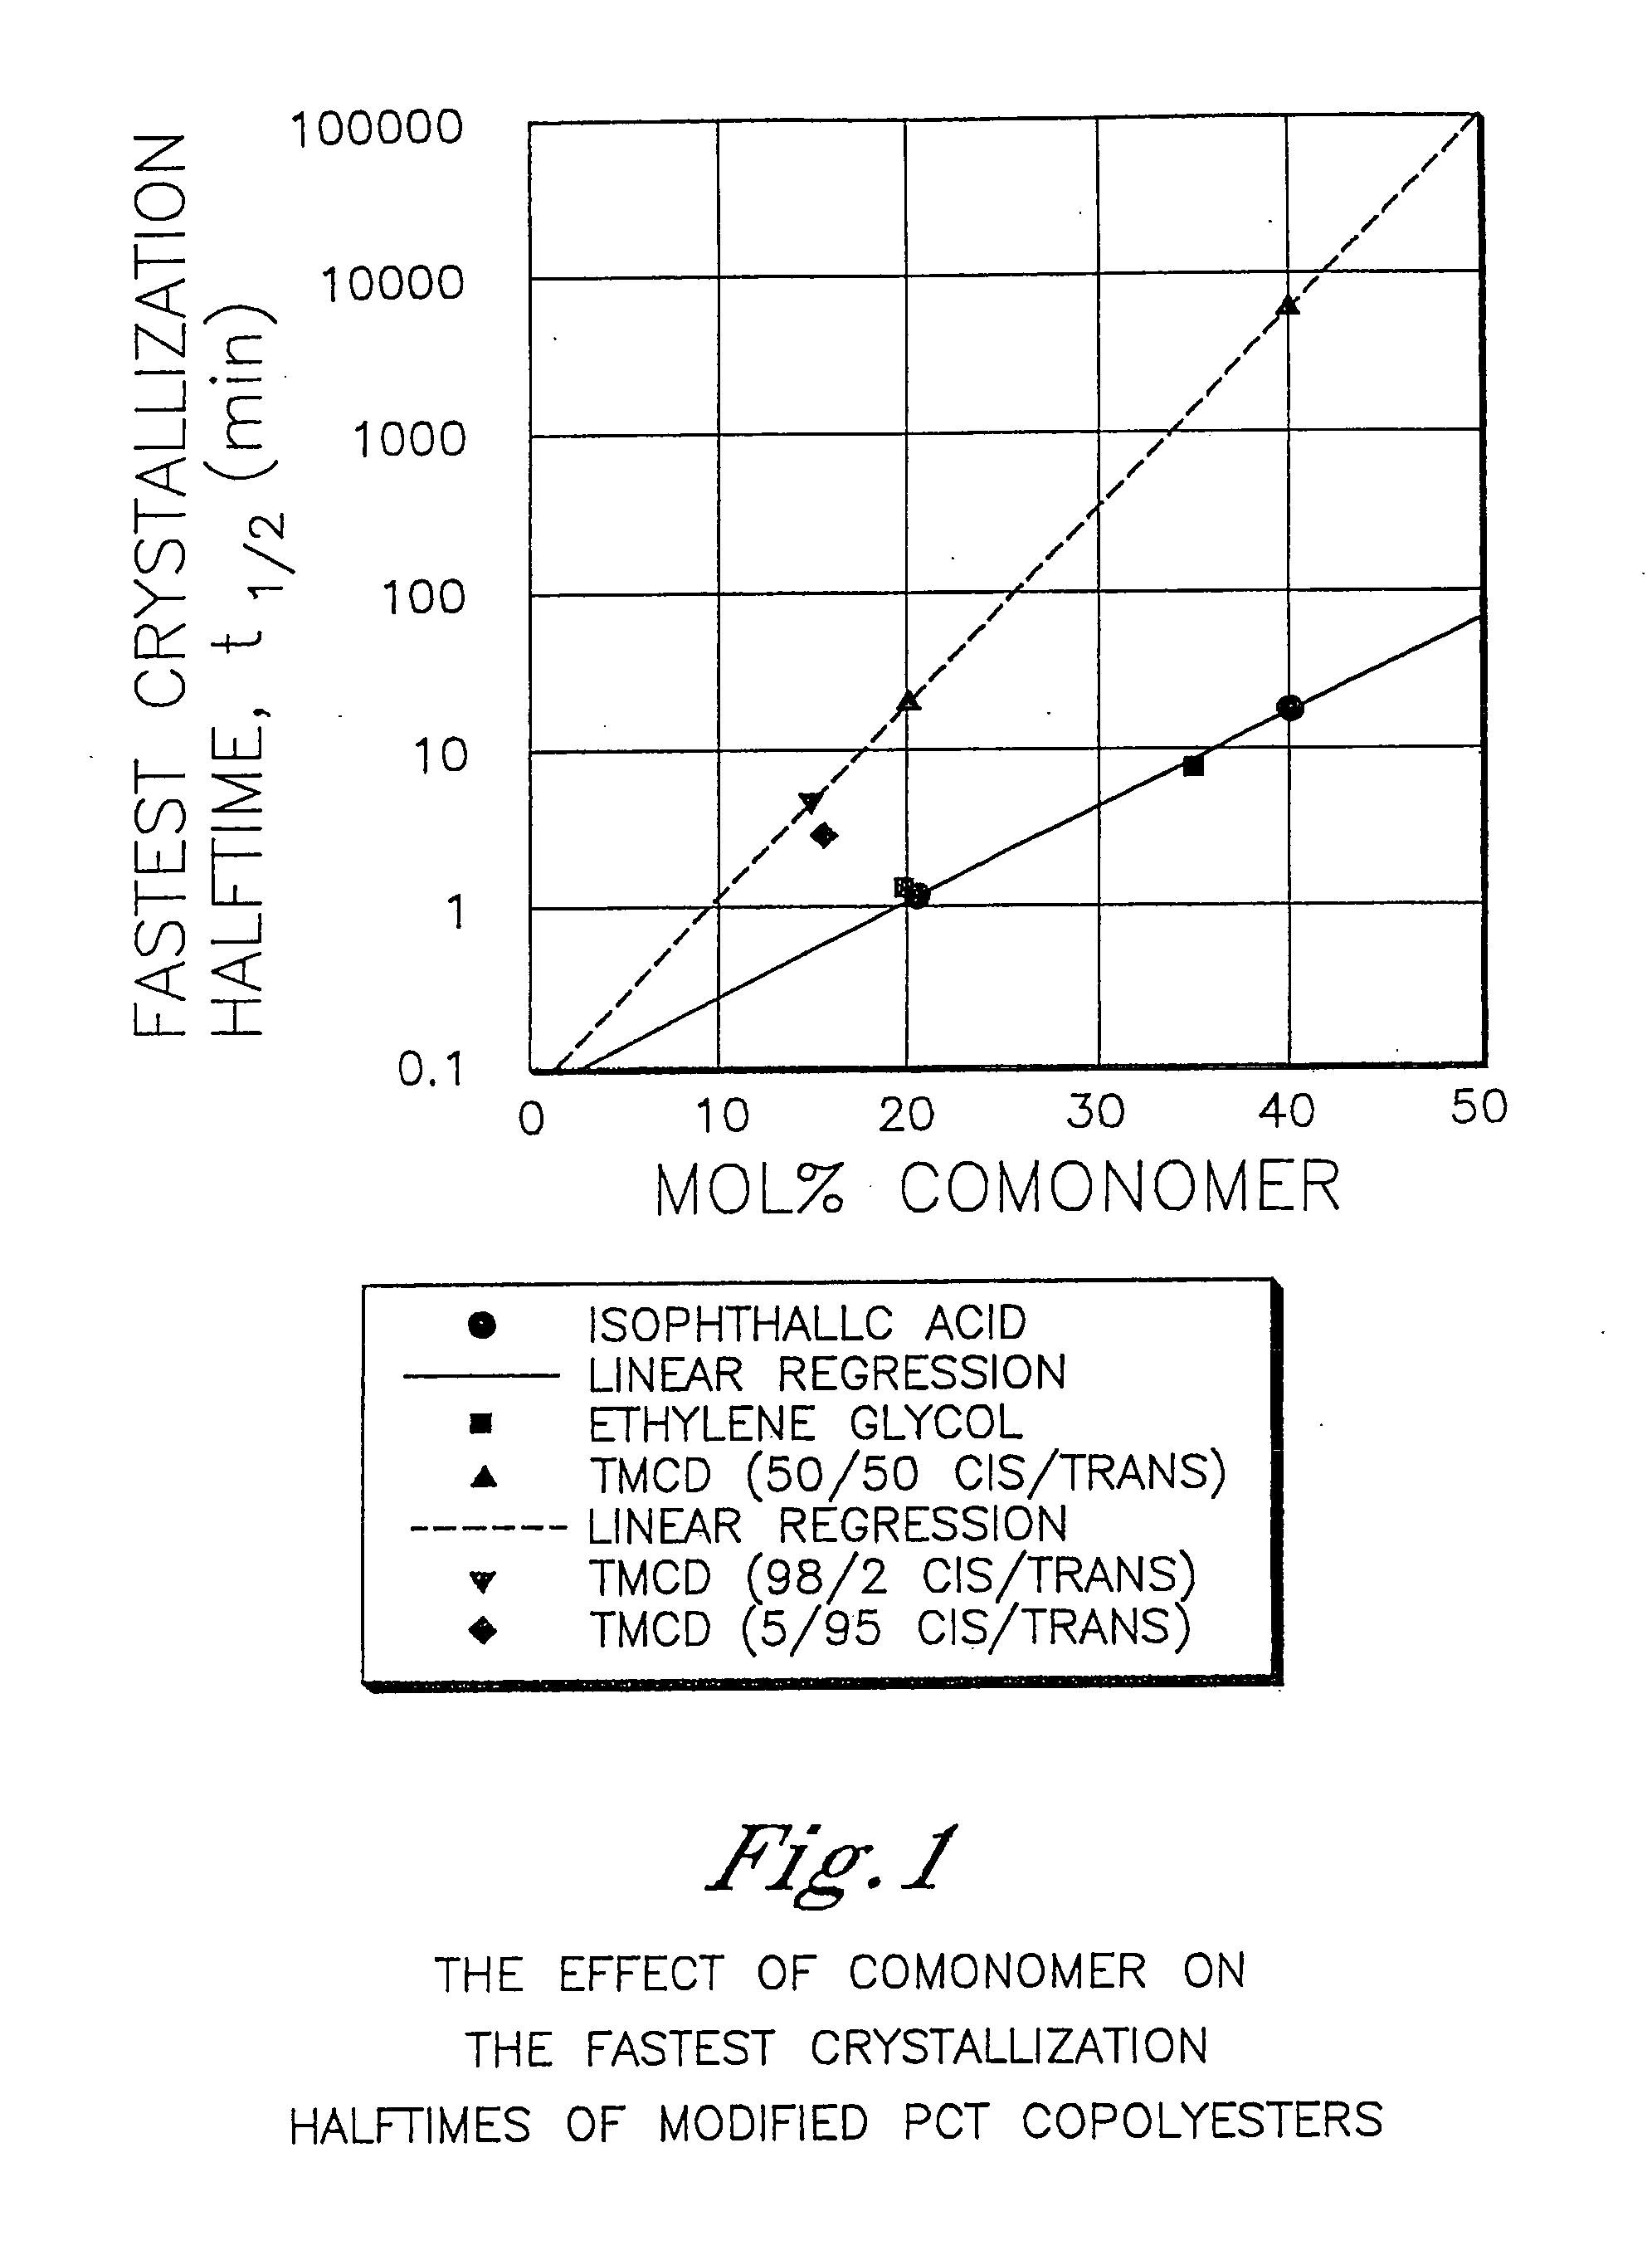 LCD films comprising polyester compositions formed from 2,2,4,4-tetramethyl-1,3-cyclobutanediol and 1,4-cyclohexanedimethanol